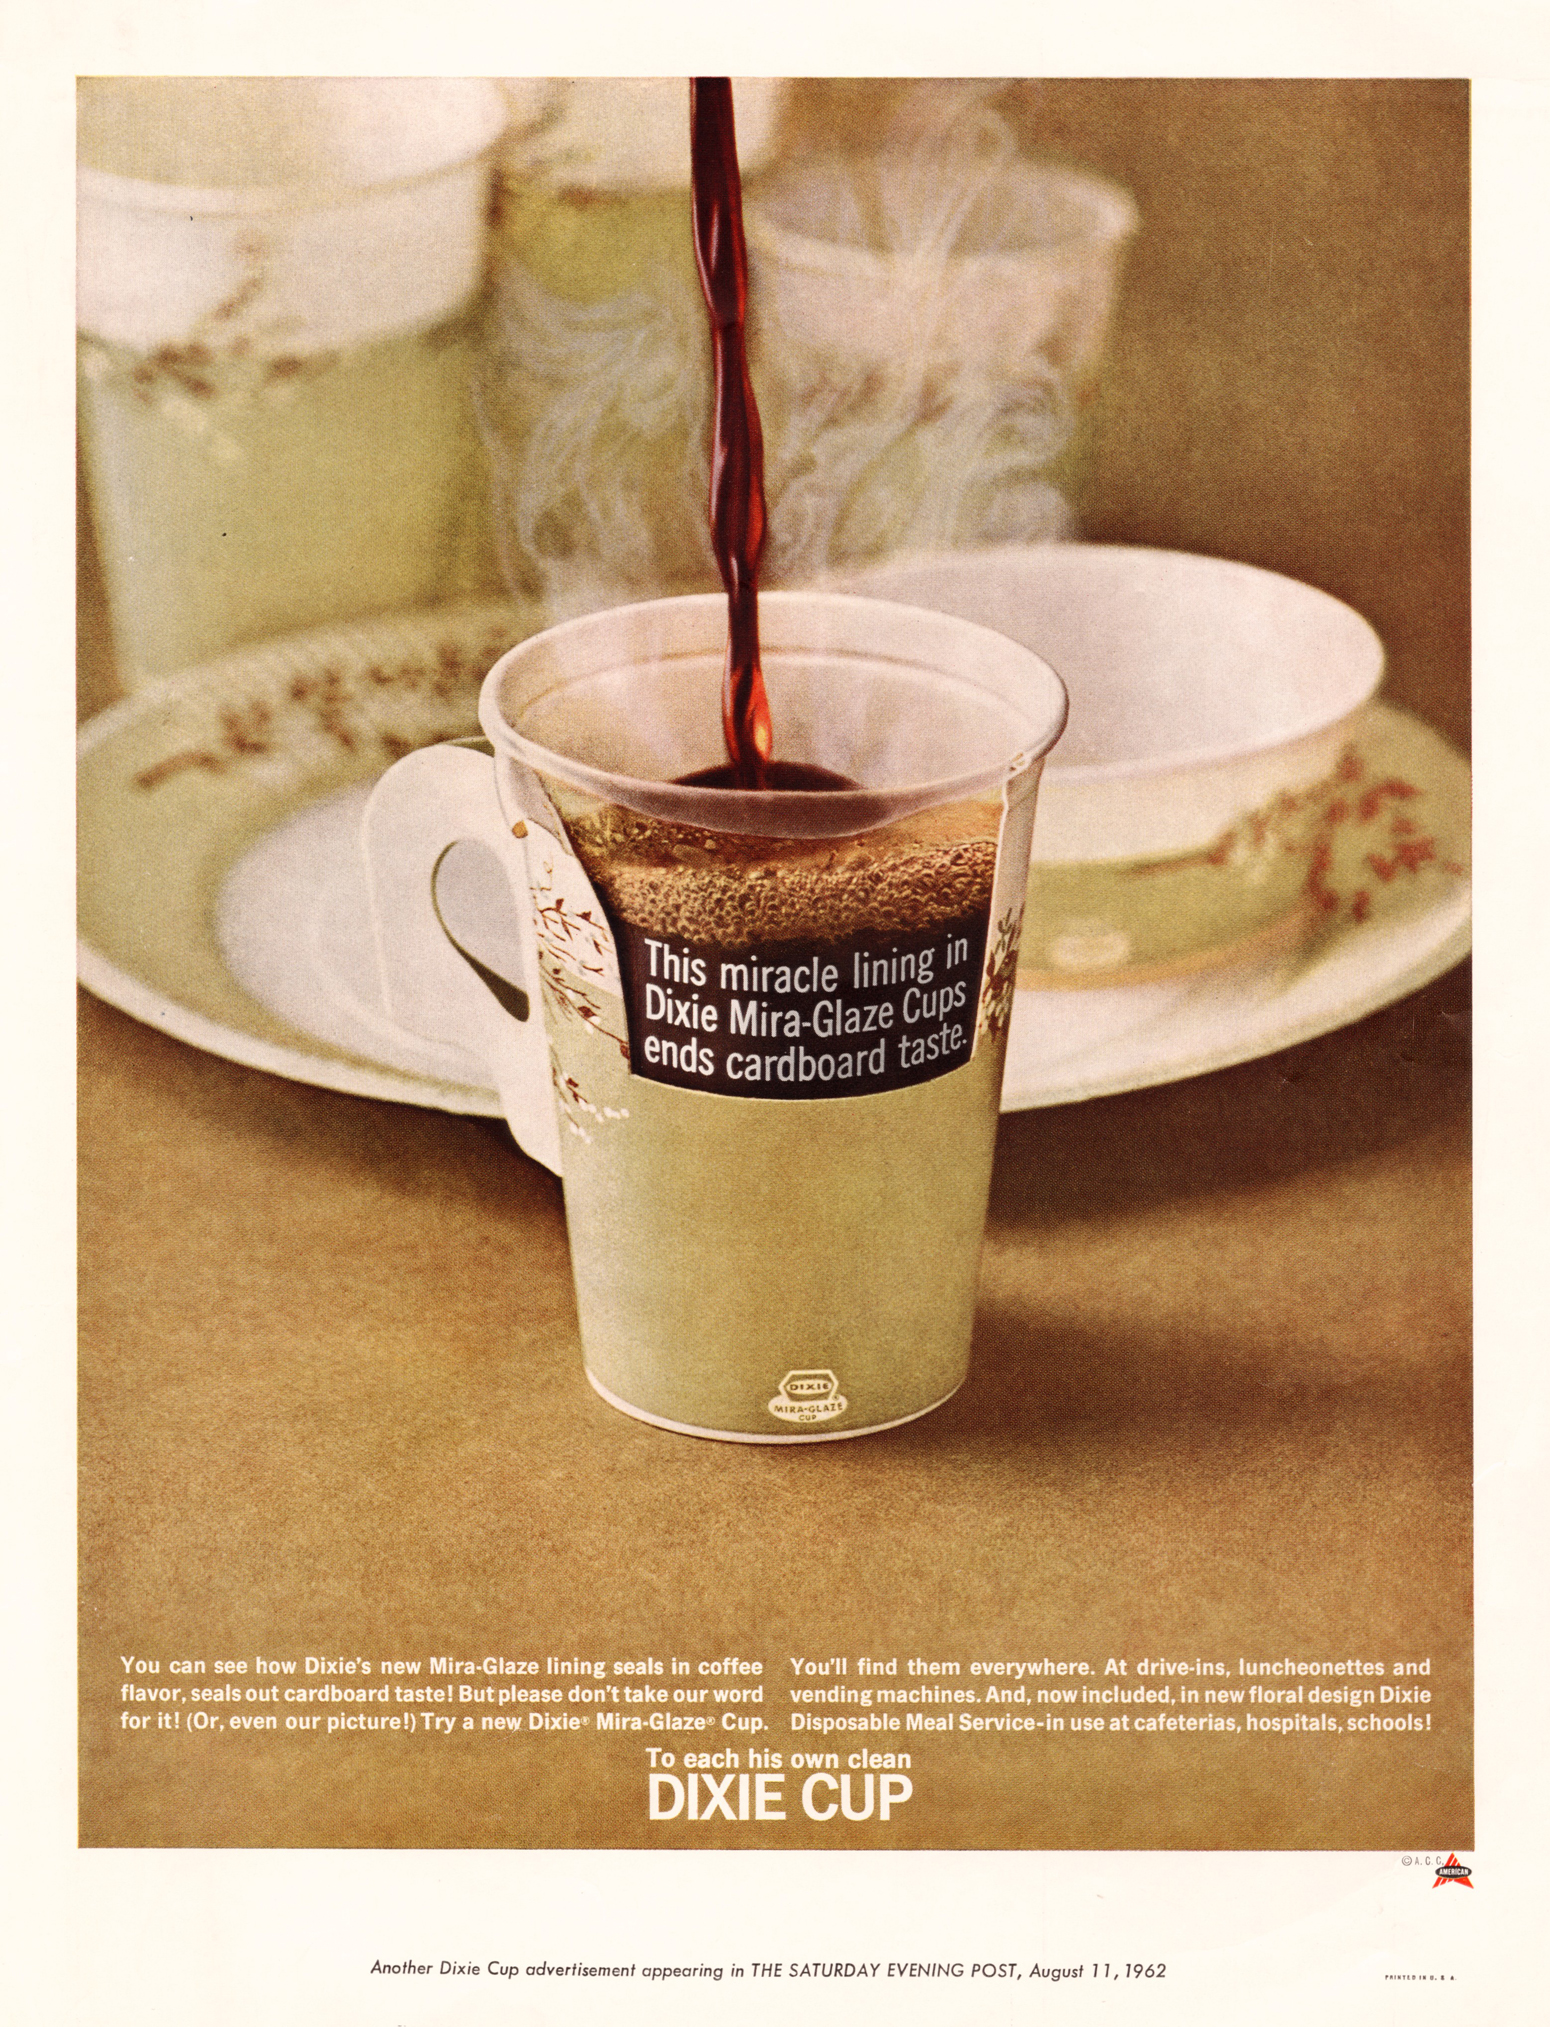 Whistlin' Dixie: Marketing the Paper Cup, 1910-1960